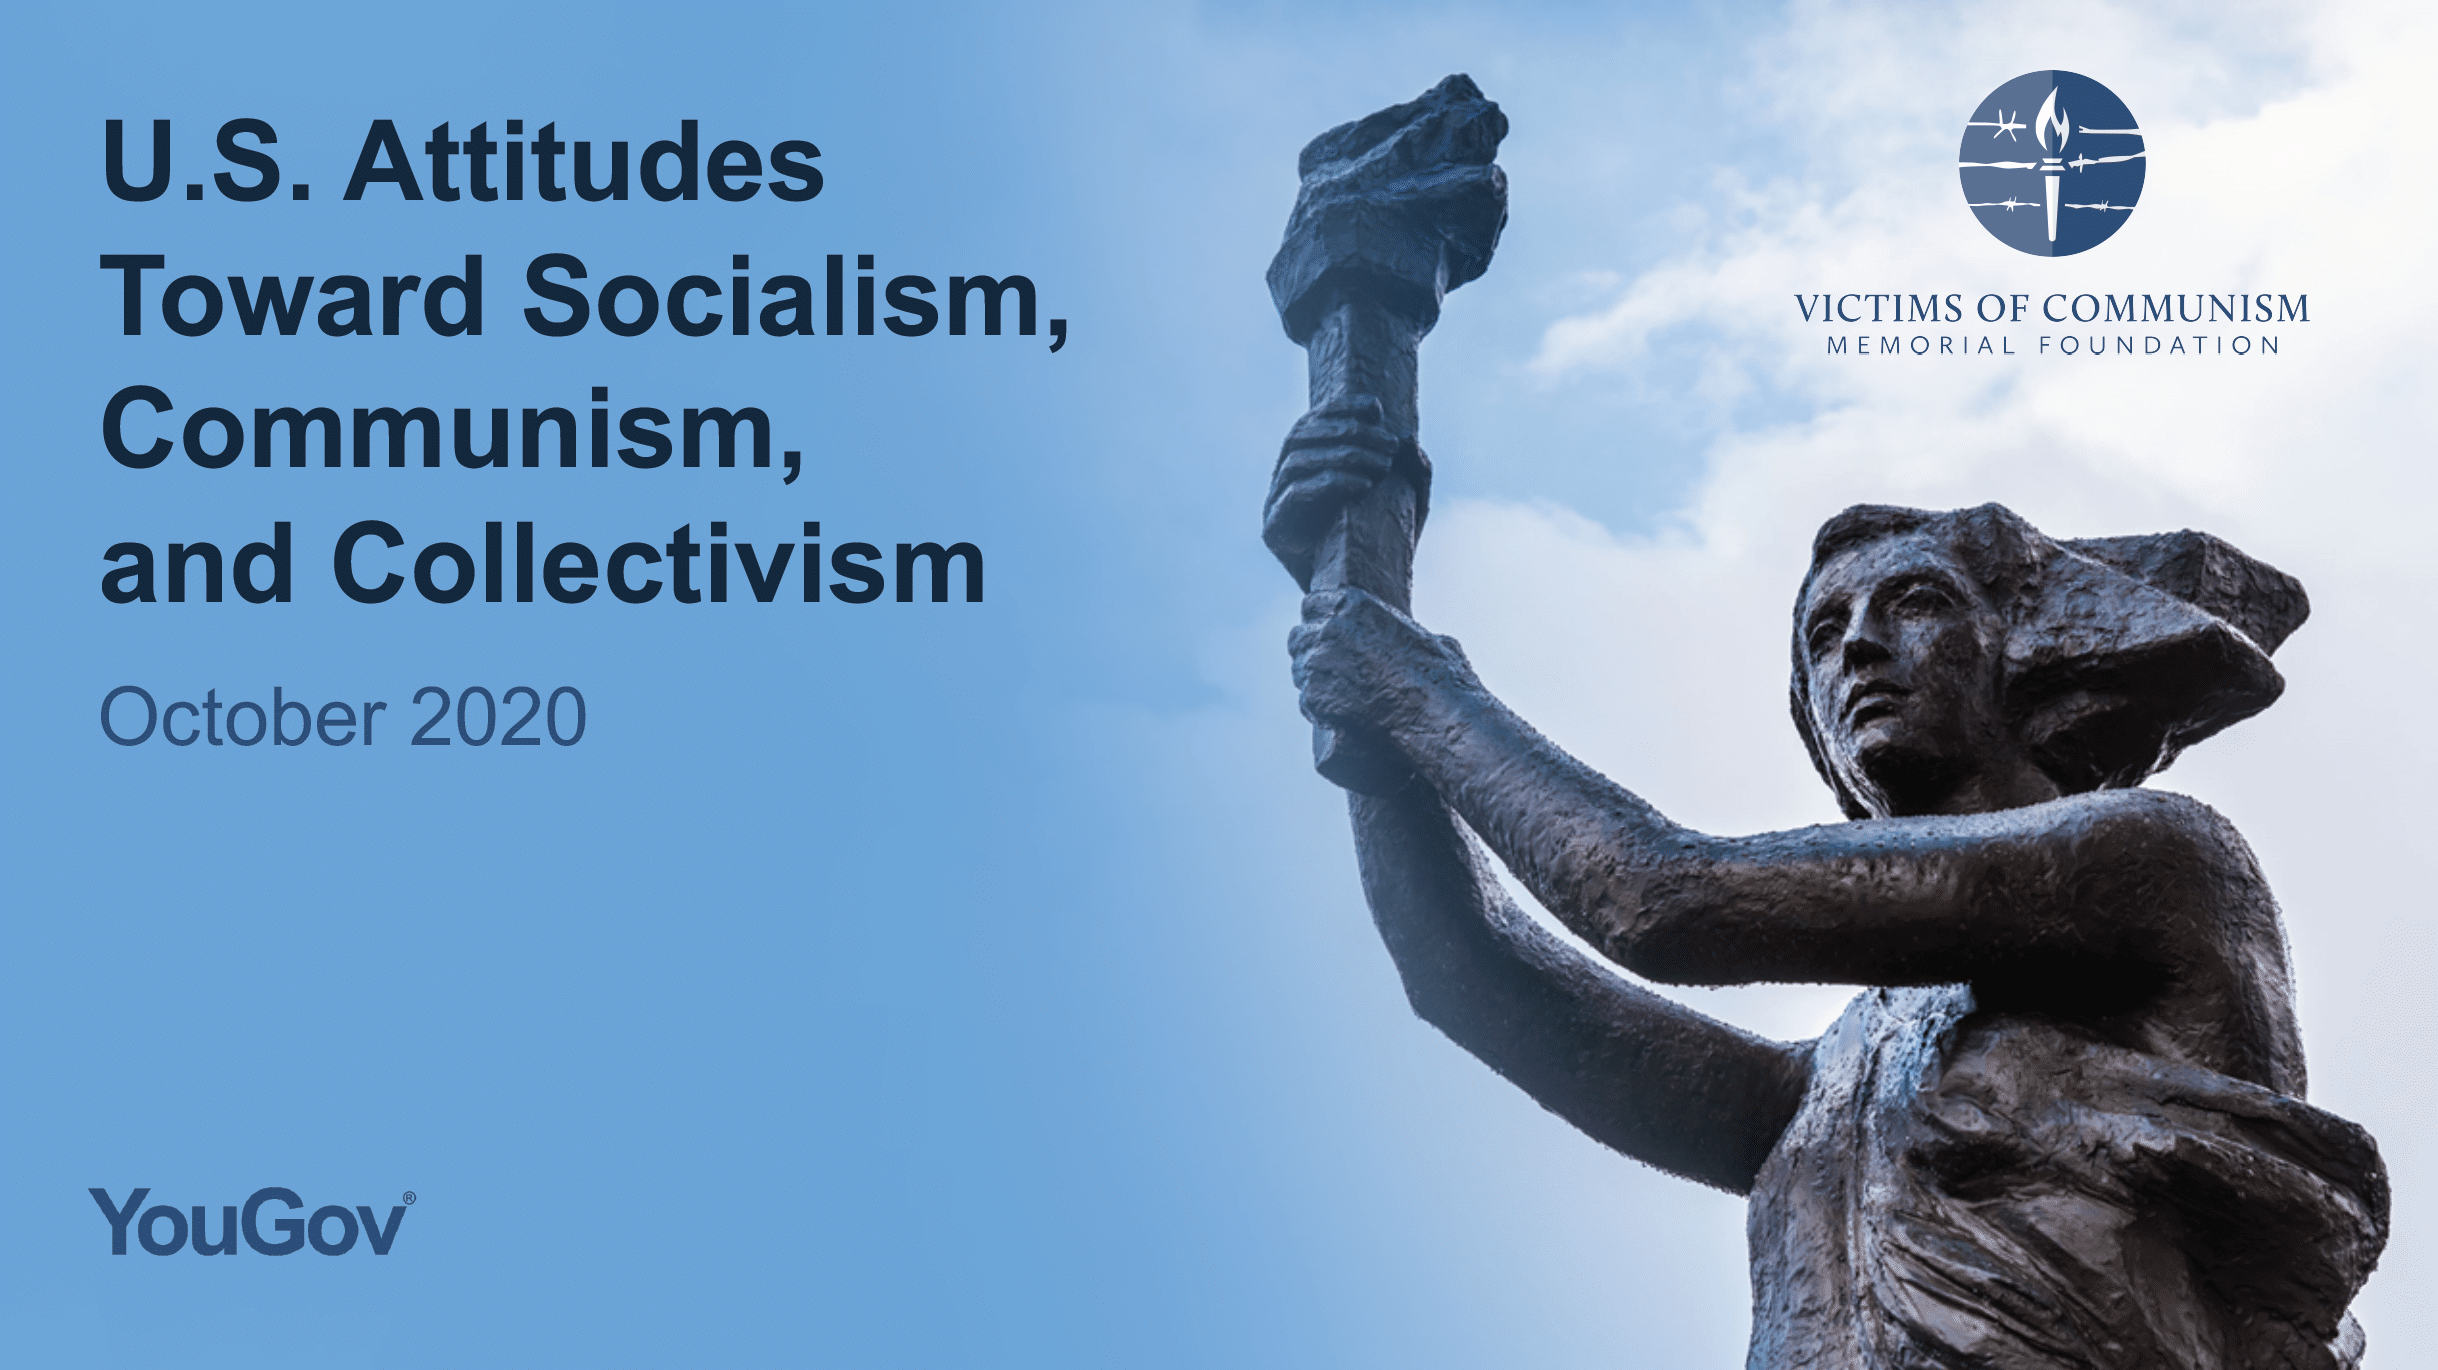 The Victims of Communism Memorial Foundation (VOC) today released its fifth Annual Report on U.S. Attitudes Toward Socialism, Communism, and Collec